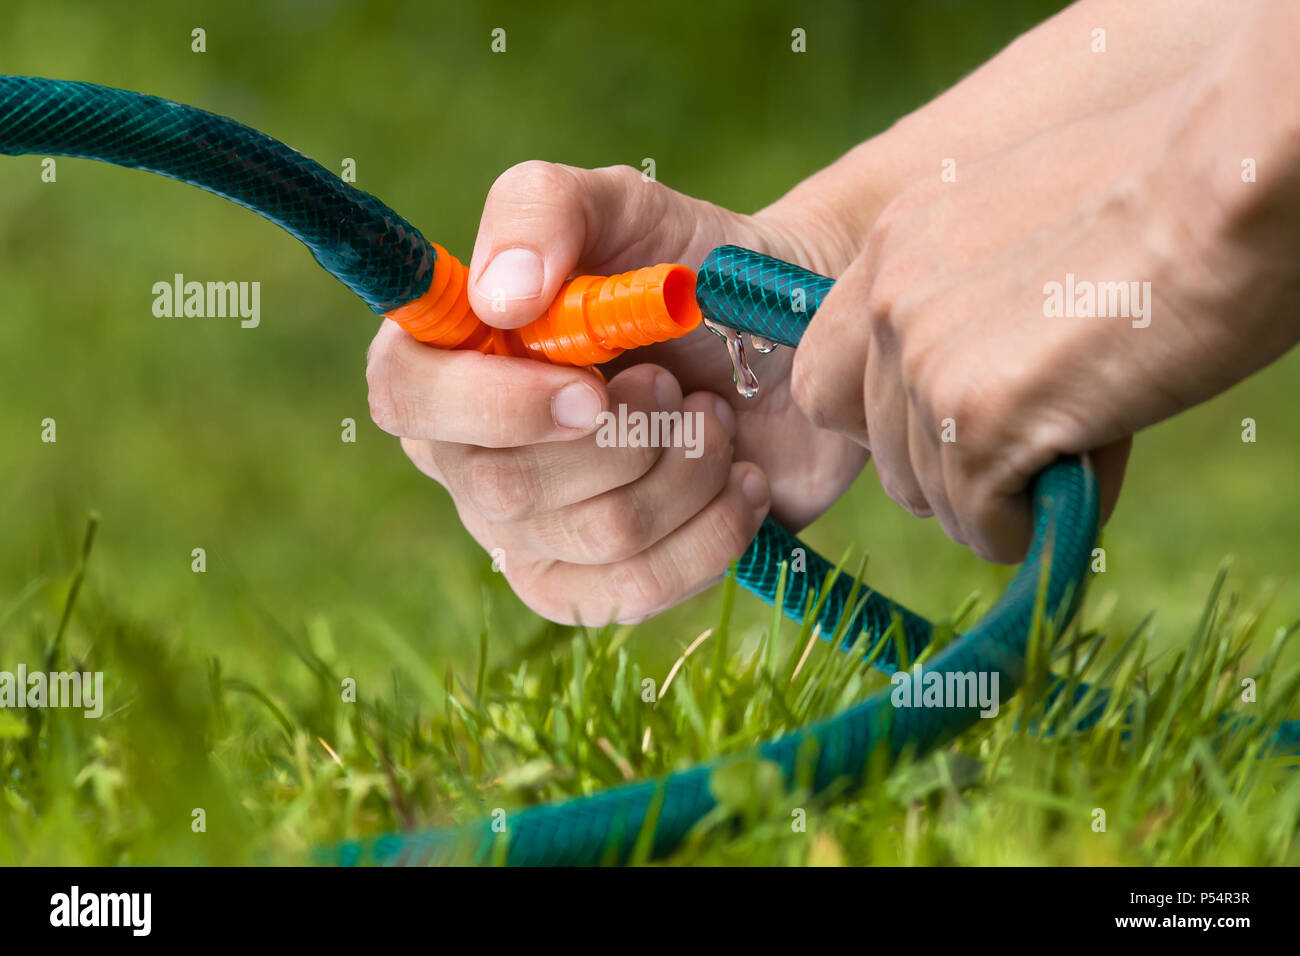 hands connecting garden hoses for irrigation lawn Stock Photo